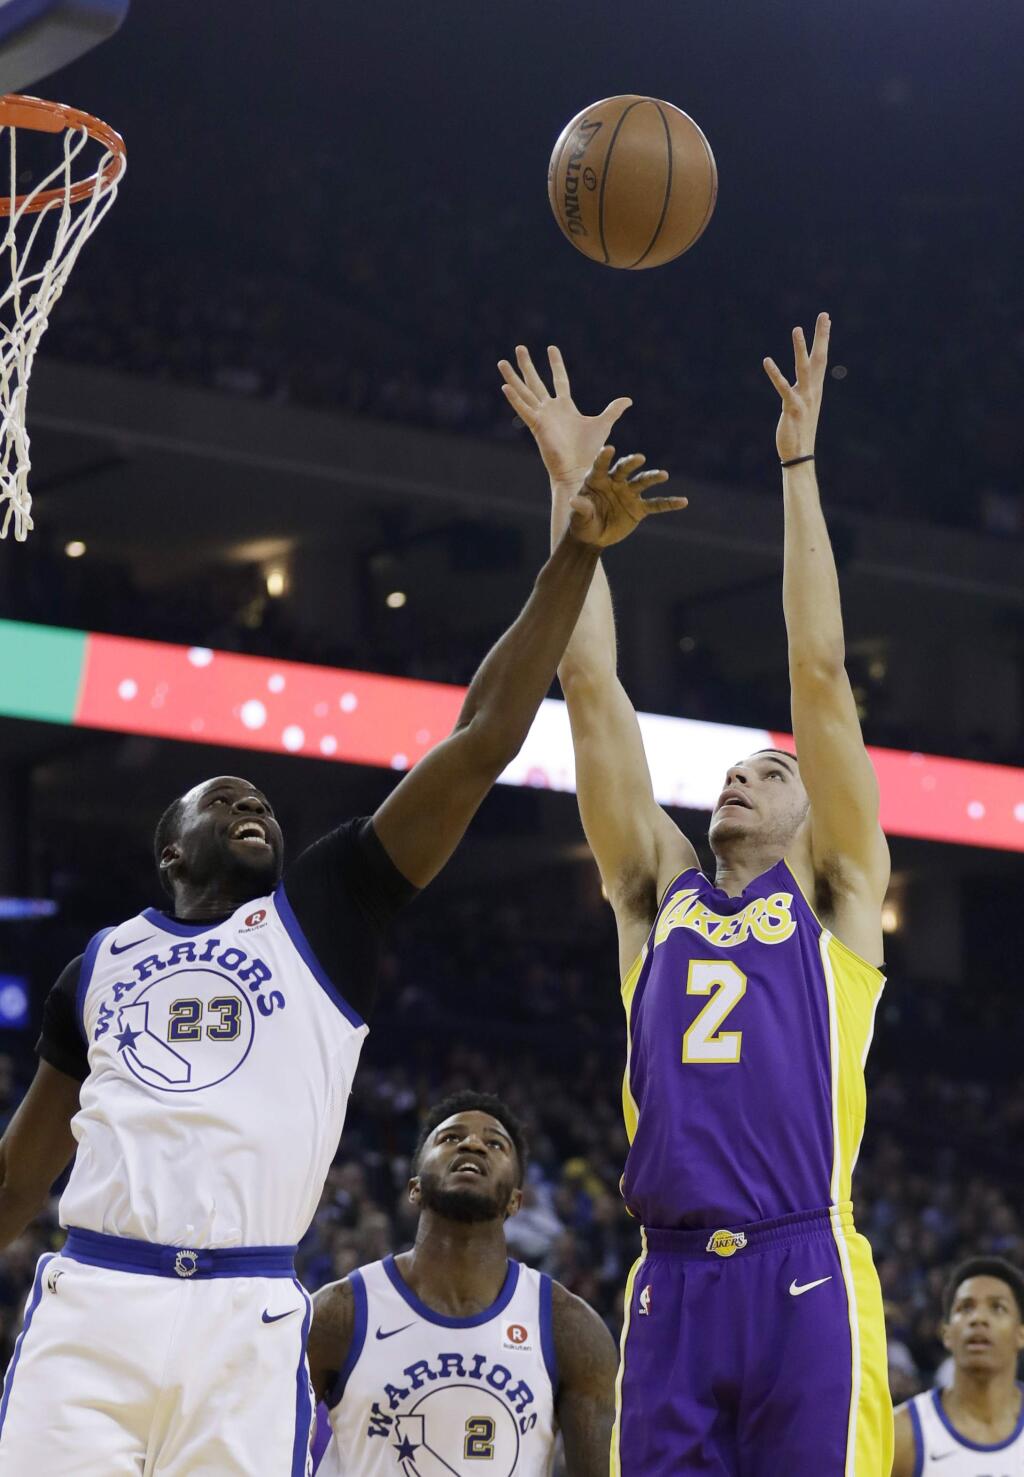 Golden State Warriors forward Draymond Green (23) and Los Angeles Lakers guard Lonzo Ball (2) vie for a rebound during the first half of an NBA basketball game Friday, Dec. 22, 2017, in Oakland, Calif. (AP Photo/Marcio Jose Sanchez)